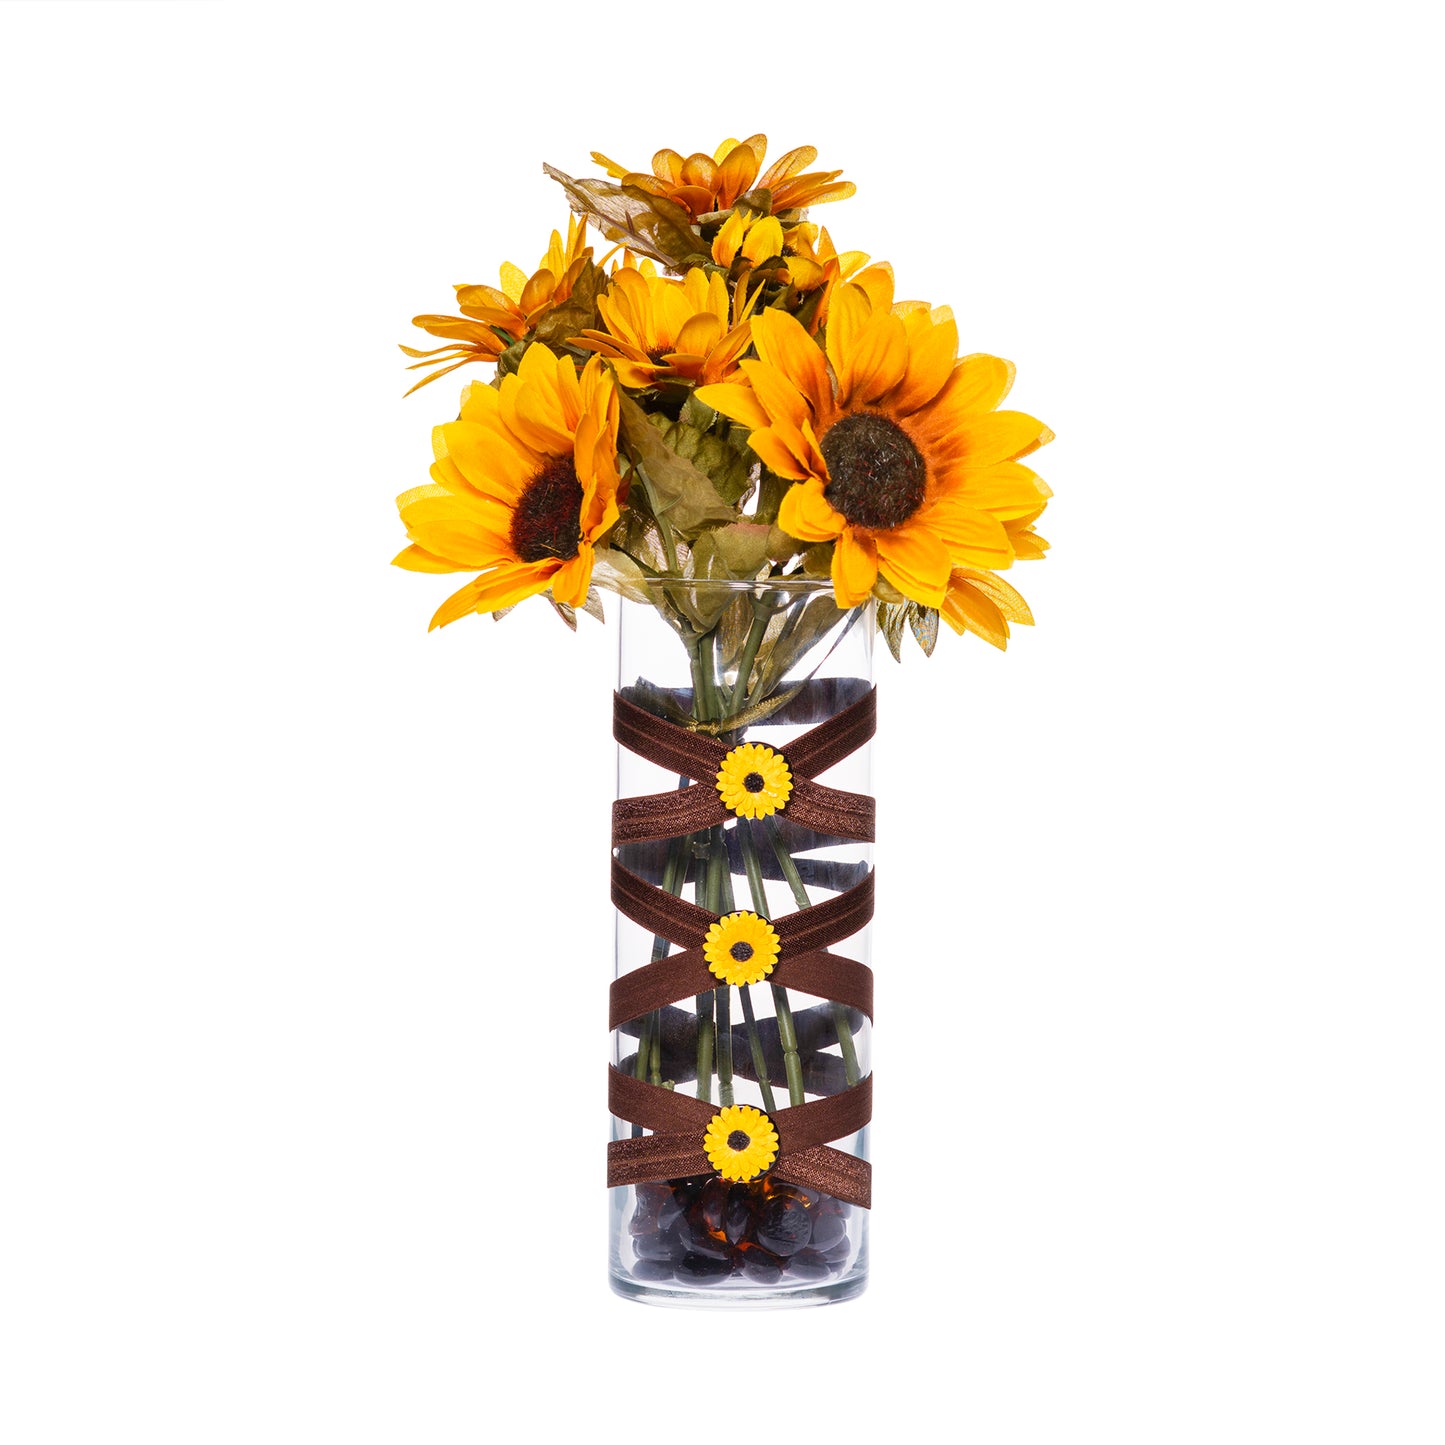 3.5" x 9.5" Vase Dark Brown 5X 6 Sunflowers Medium Fall-O-Ween Collection Complete Set